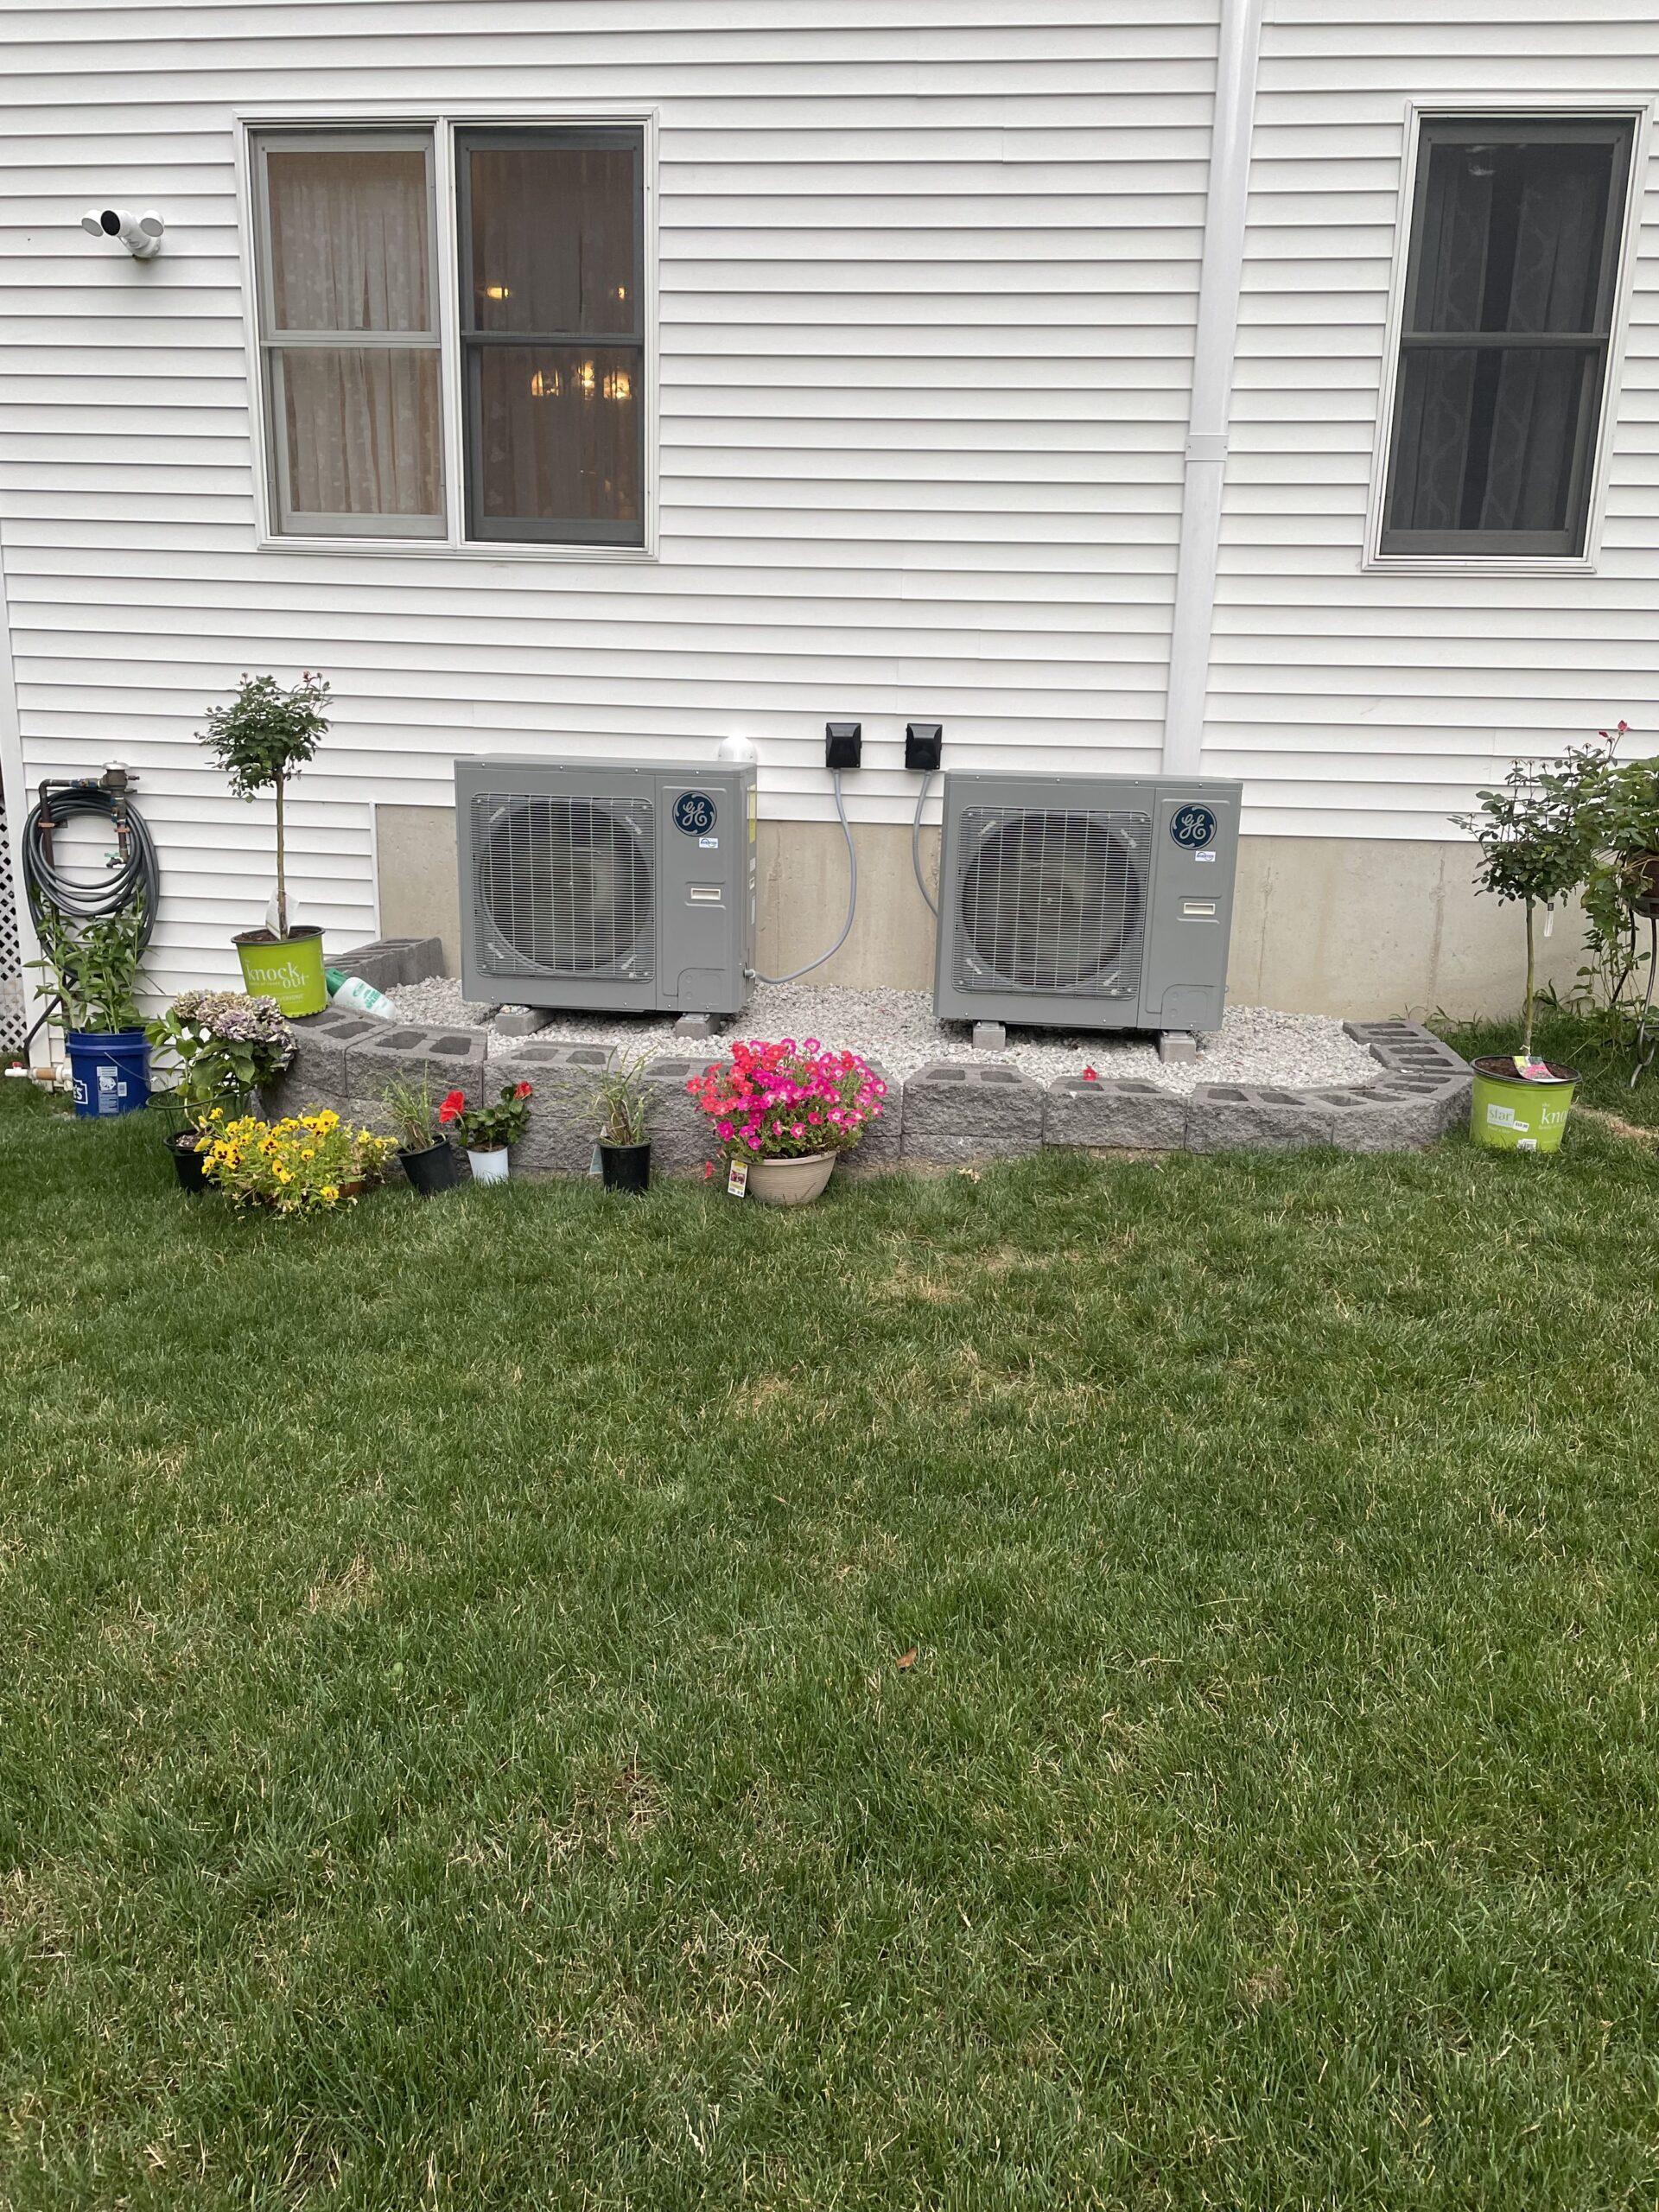 Heatpump air-condition units installed in the backyard